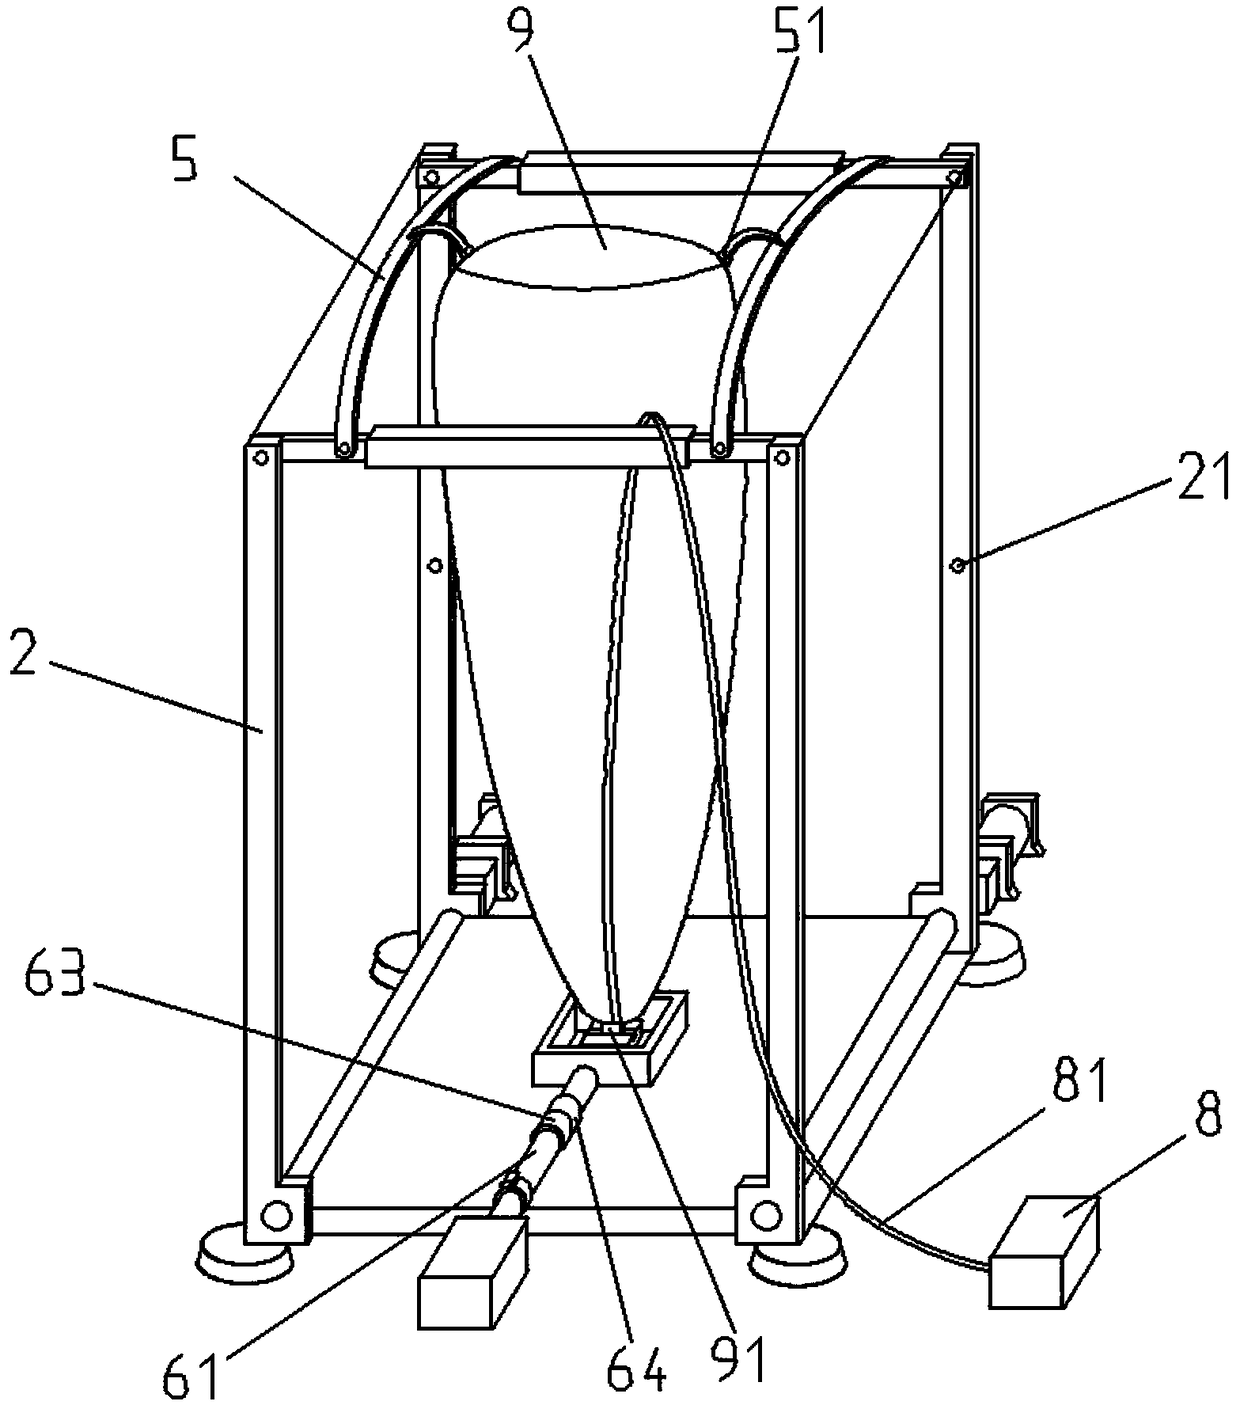 Automatic inflation releasing device of shipborne sounding balloon